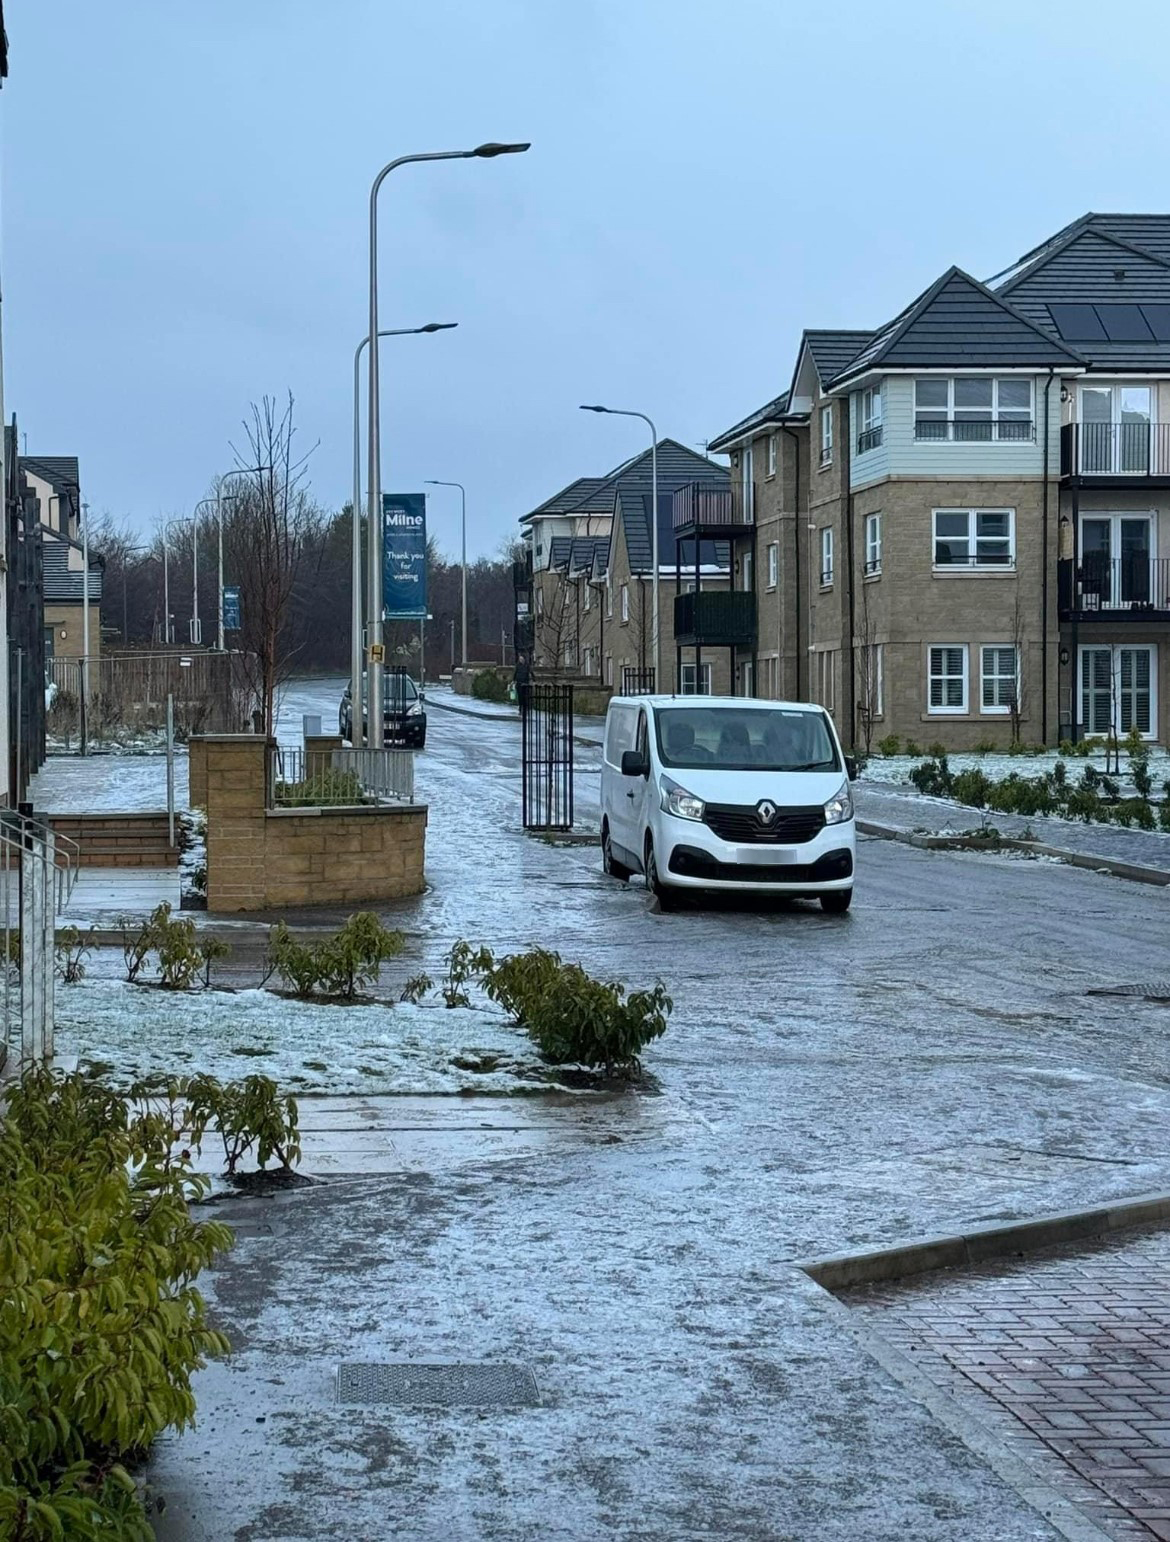 Roads in the Letham Mains estate were under a sheet of ice.